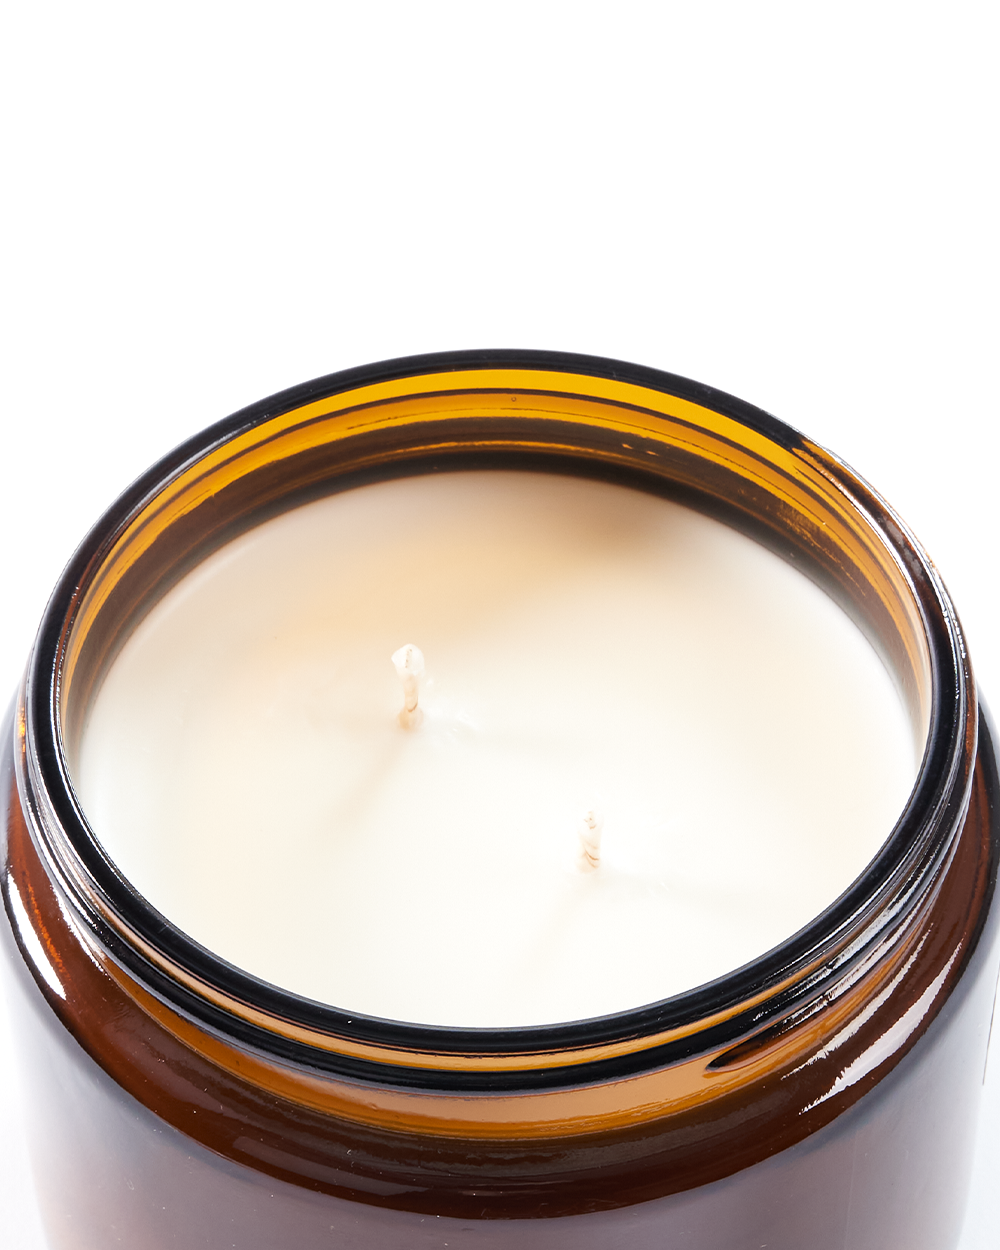 500g Amber Jay Soy Candle - VAL